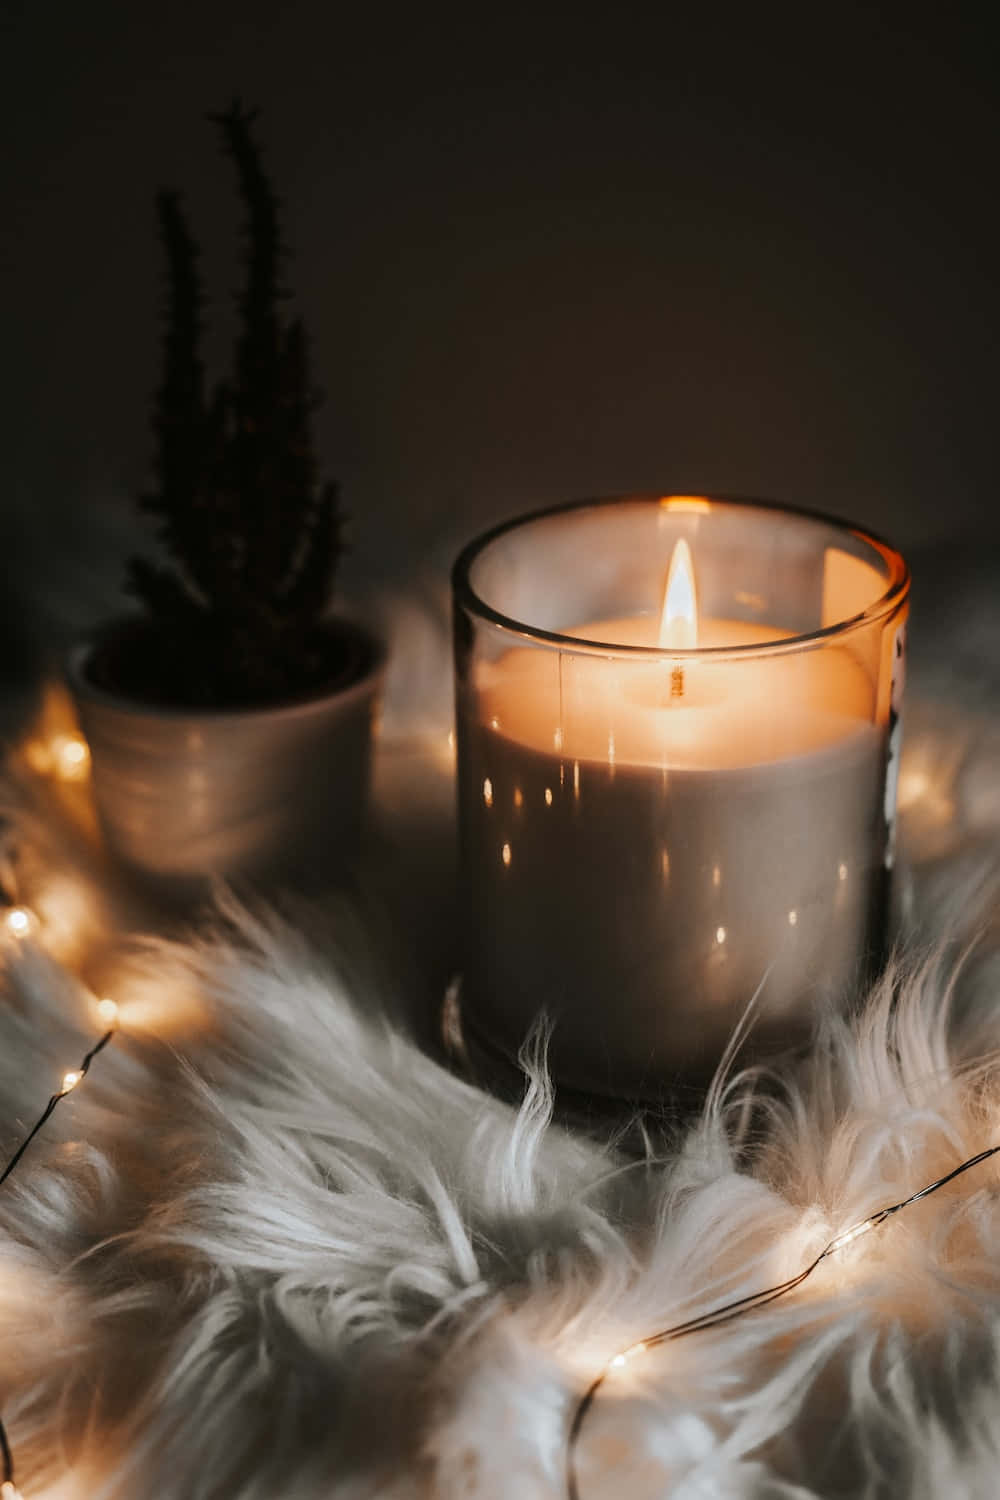 A flickering candle flame illuminates a peaceful and tranquil setting.